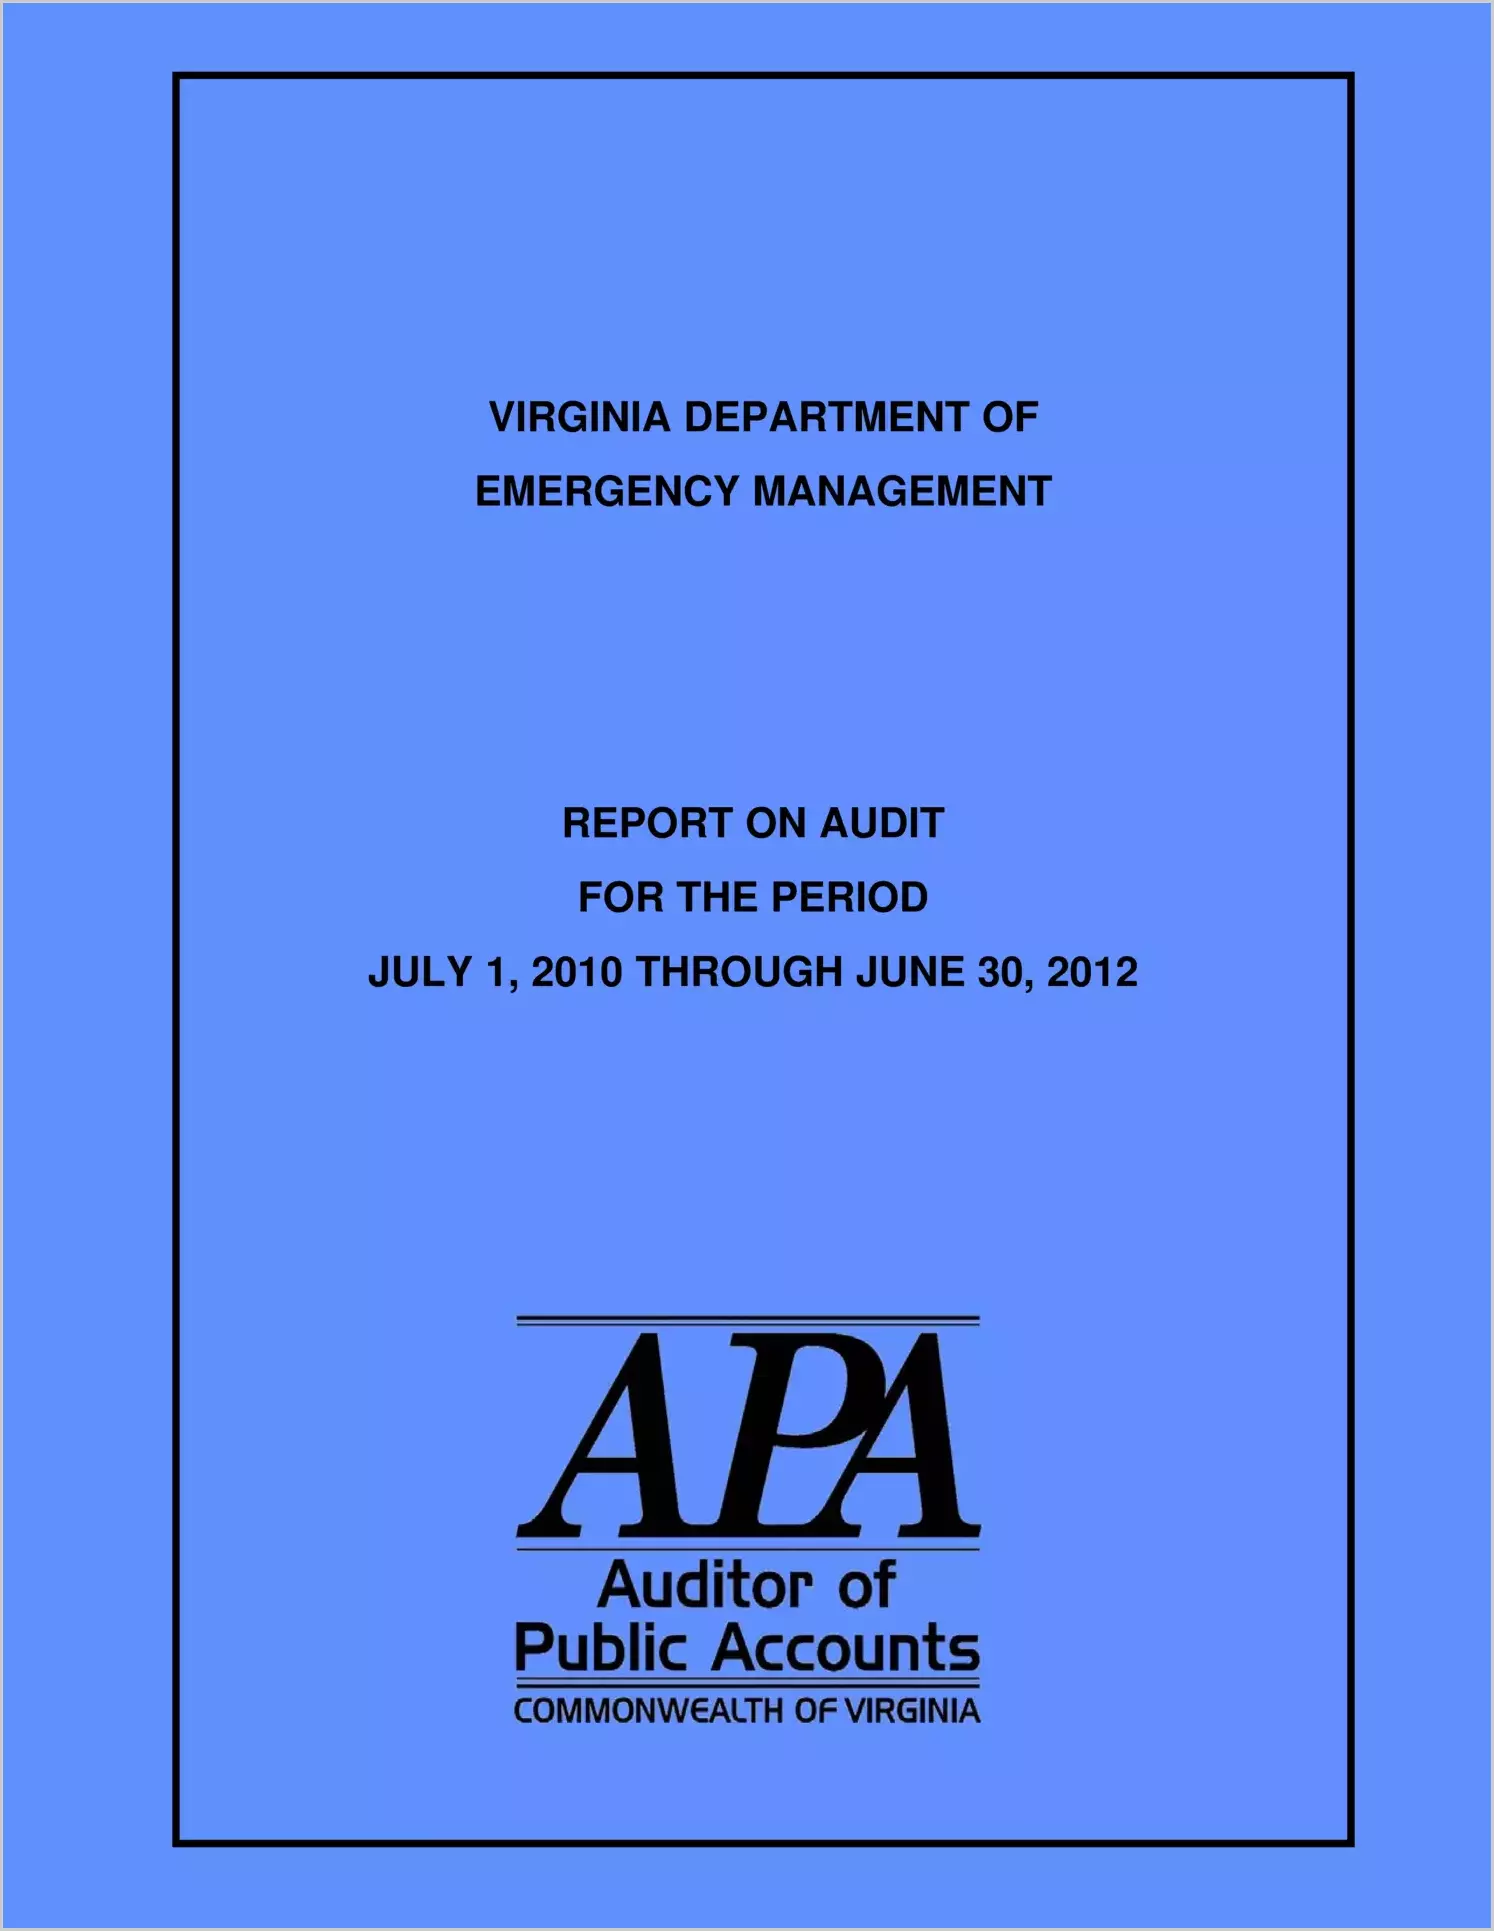 Virginia Department of Emergency Management report on audit for the period July 1, 2010 through June 30, 2012